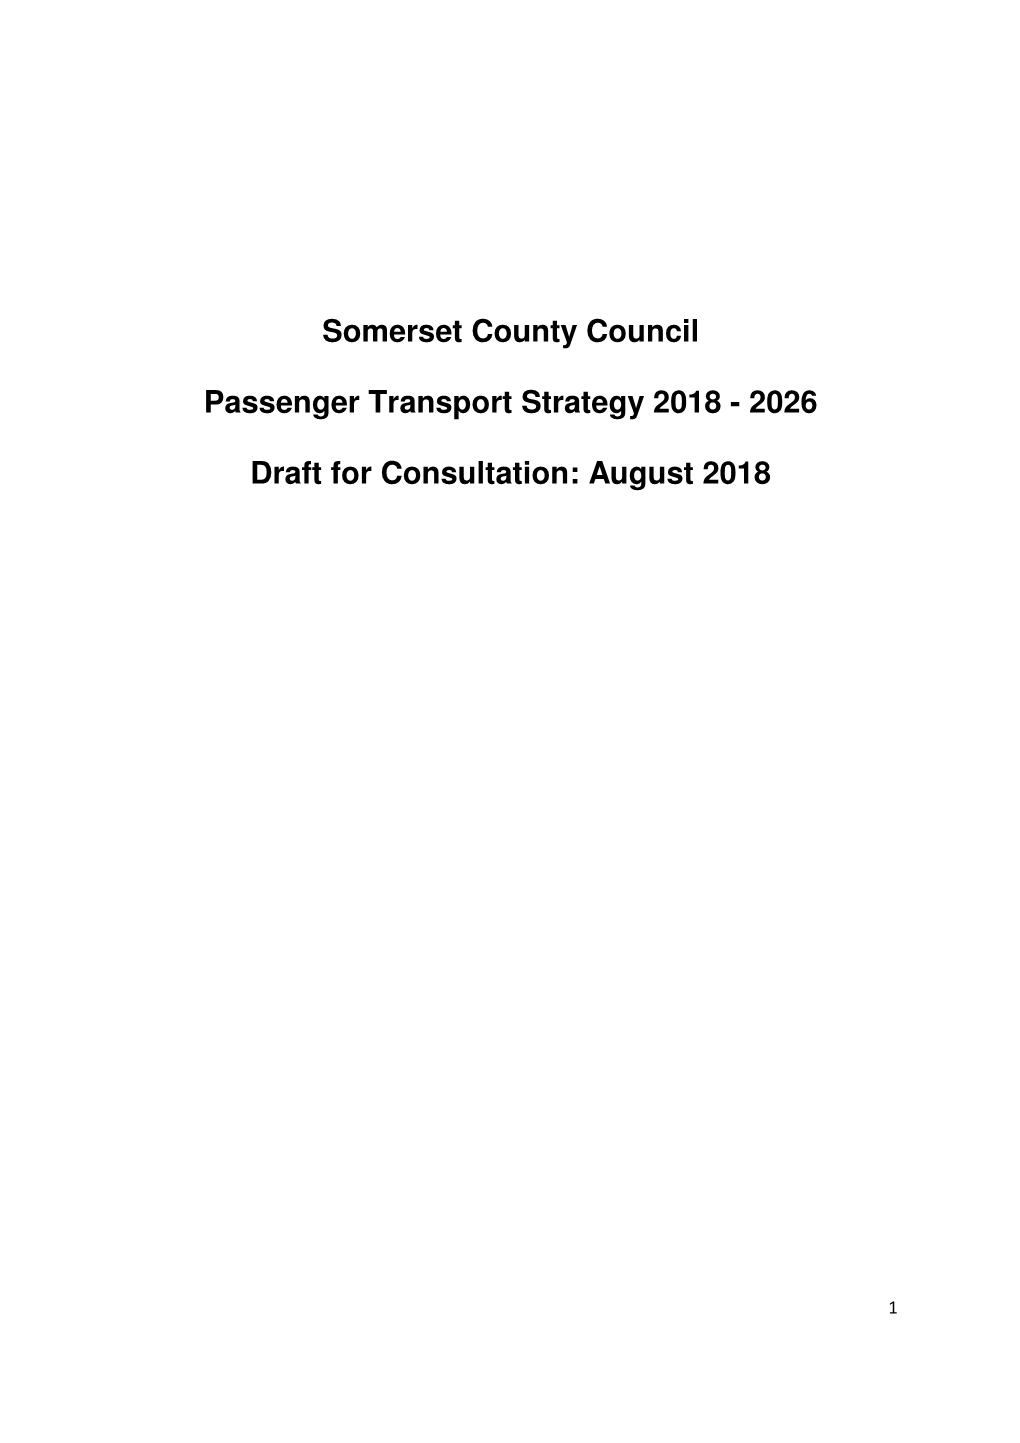 Somerset County Council Passenger Transport Strategy 2018